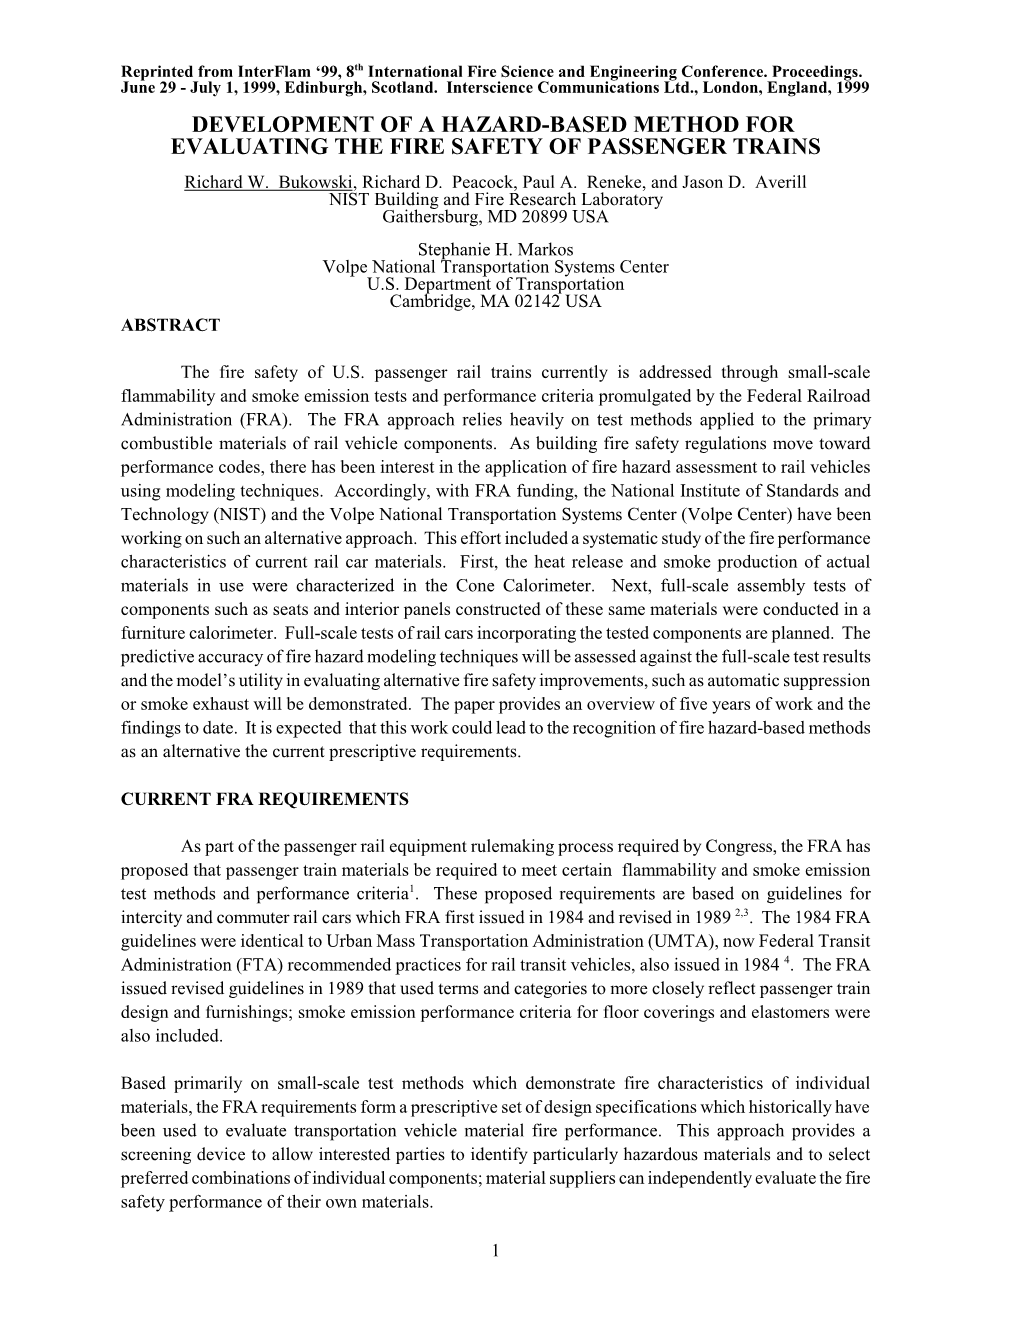 DEVELOPMENT of a HAZARD-BASED METHOD for EVALUATING the FIRE SAFETY of PASSENGER TRAINS Richard W